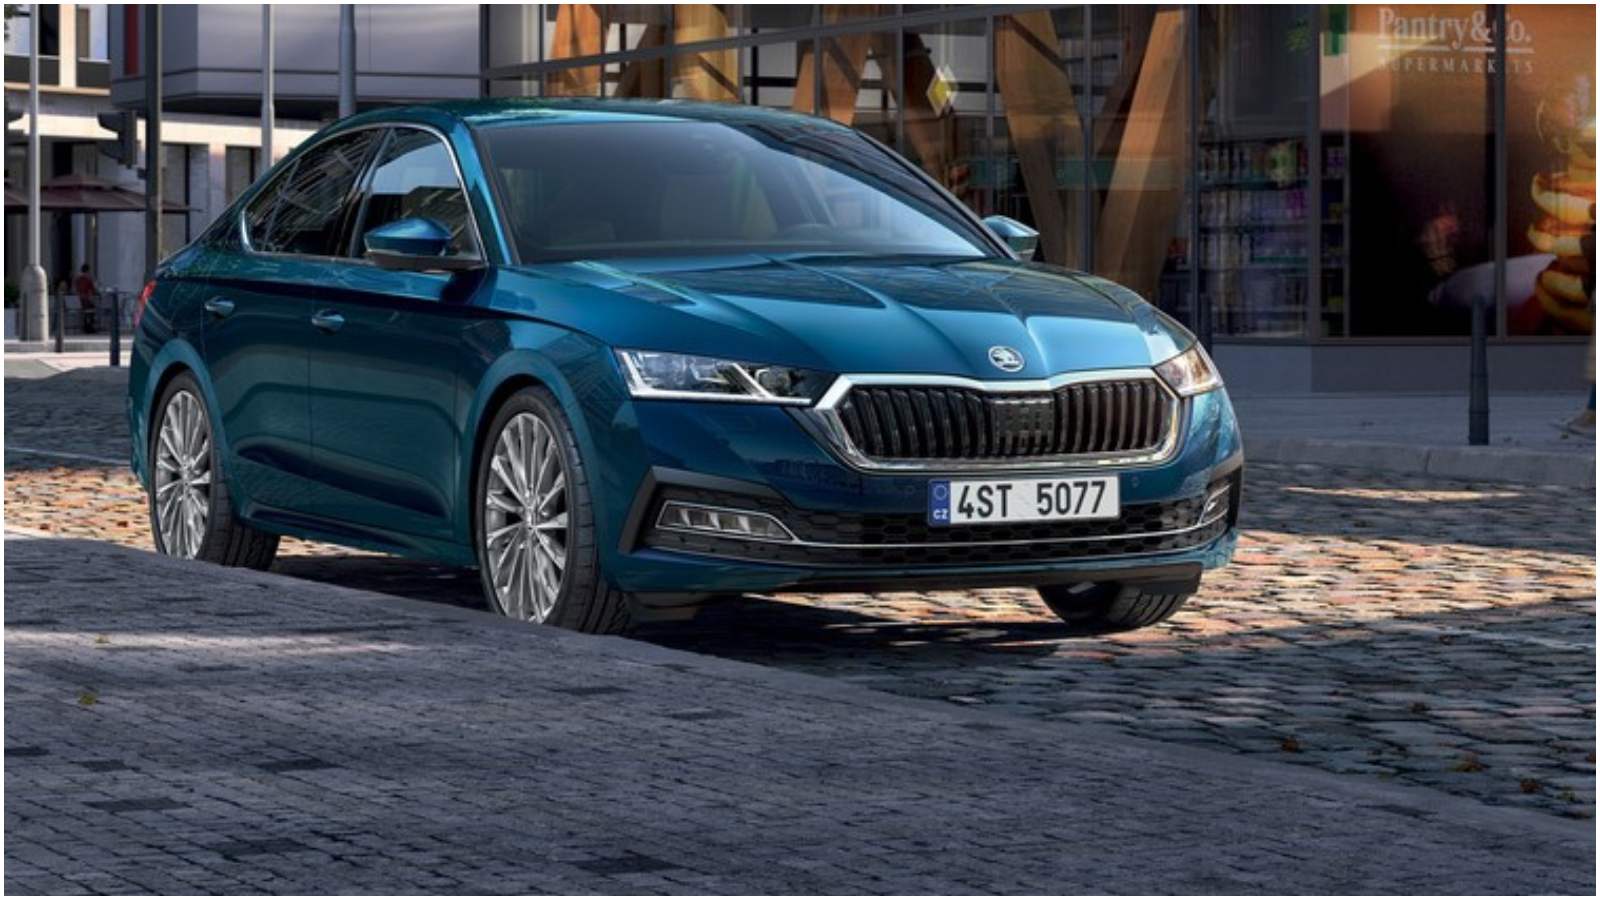 Skoda Octavia Launch Delayed In India Amid Surge In Covid Cases Indian Wire